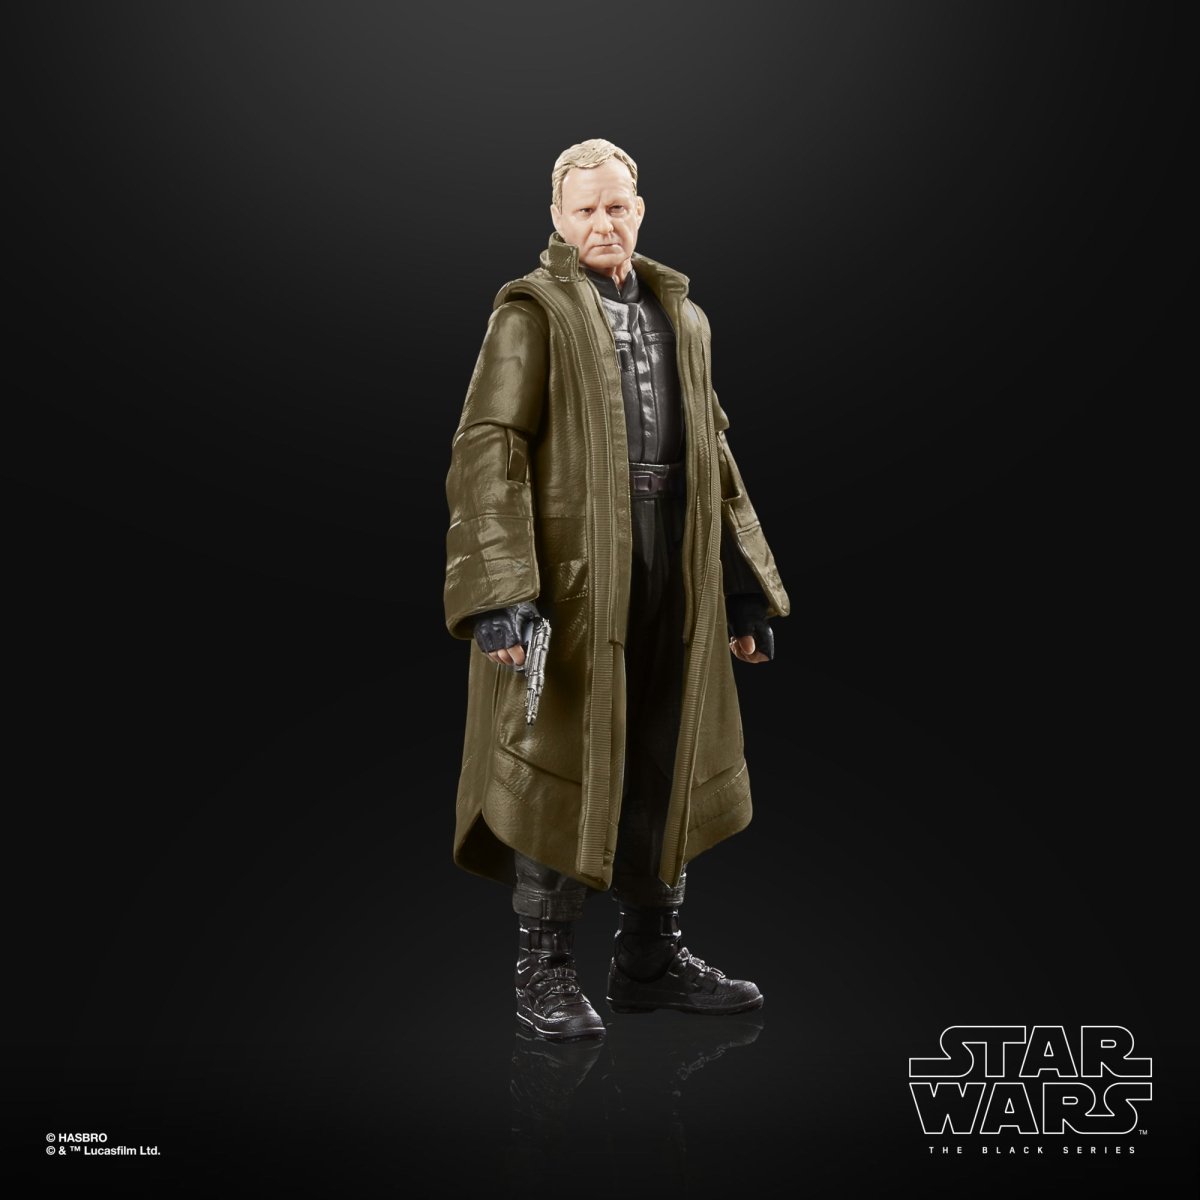 Star Wars The Black Series Luthen Rael 6-Inch Action Figure Pop-O-Loco